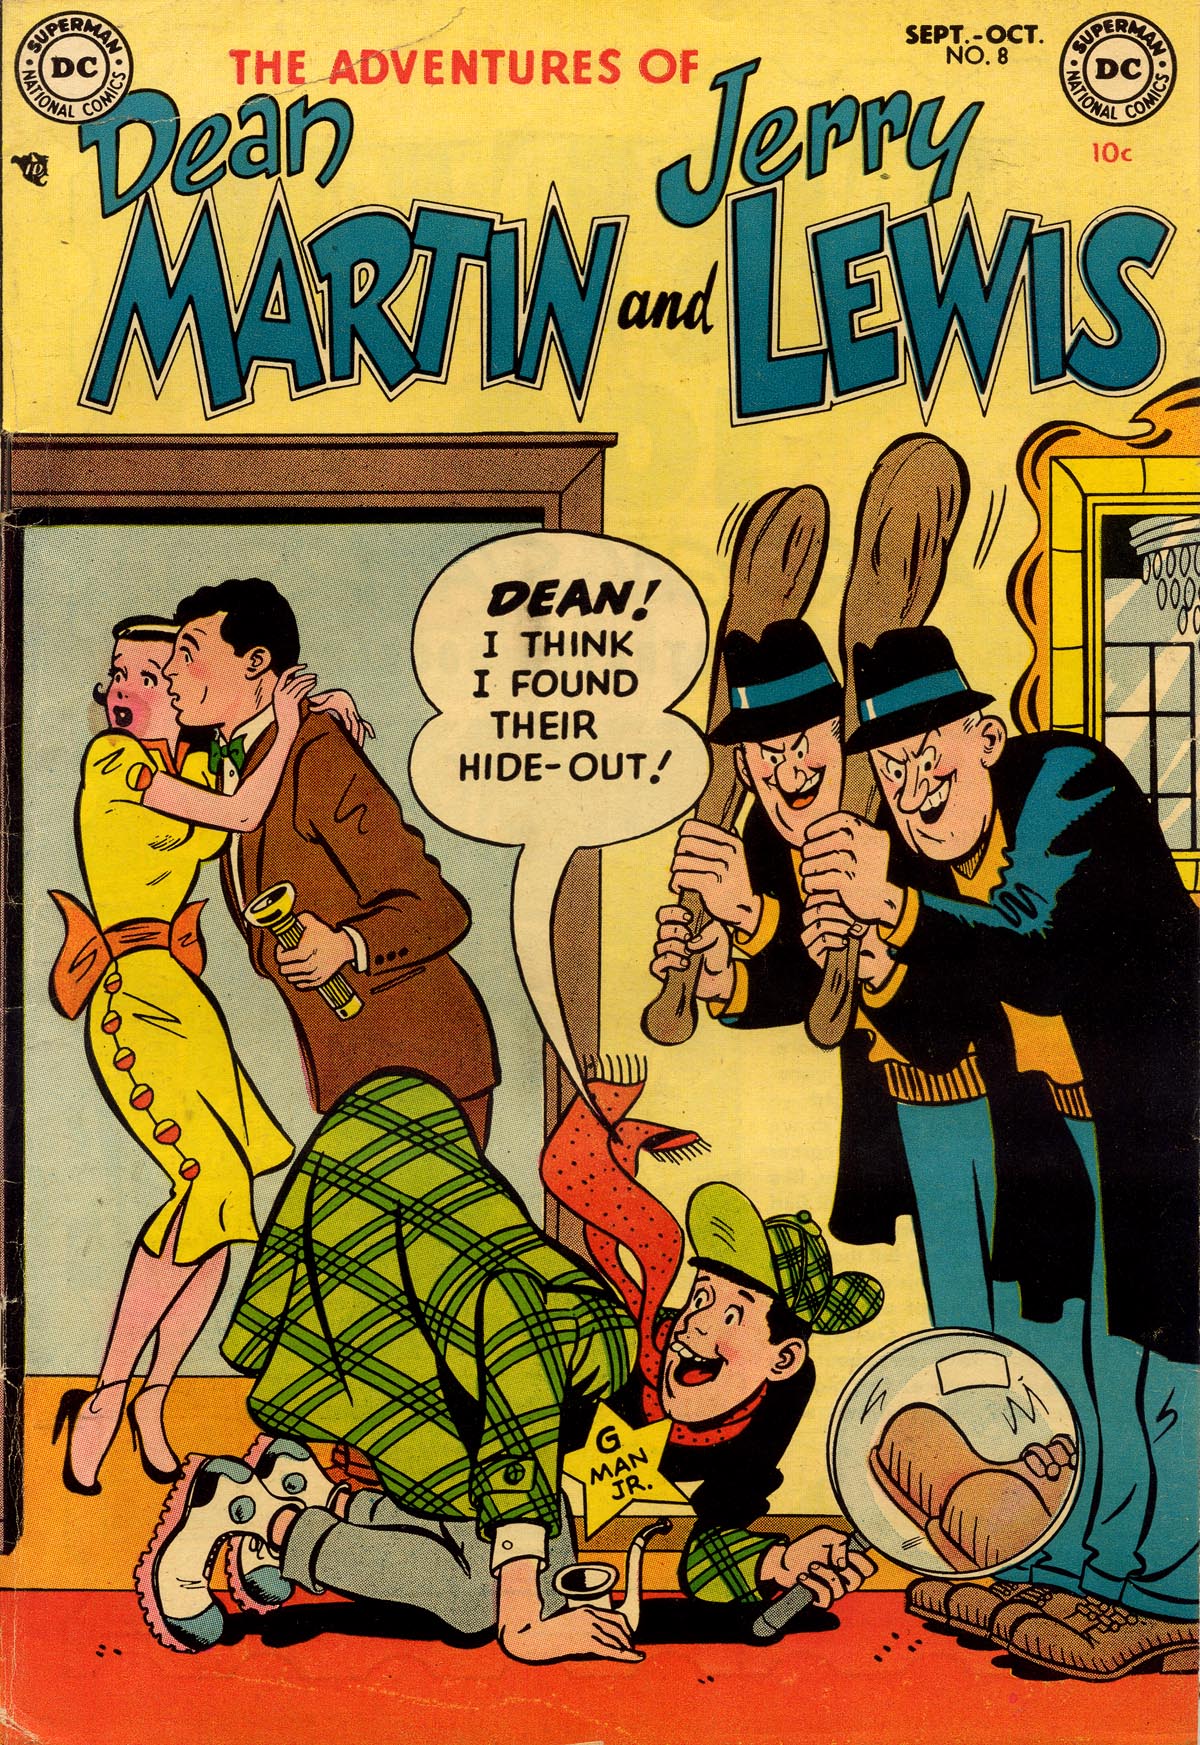 Read online The Adventures of Dean Martin and Jerry Lewis comic -  Issue #8 - 1